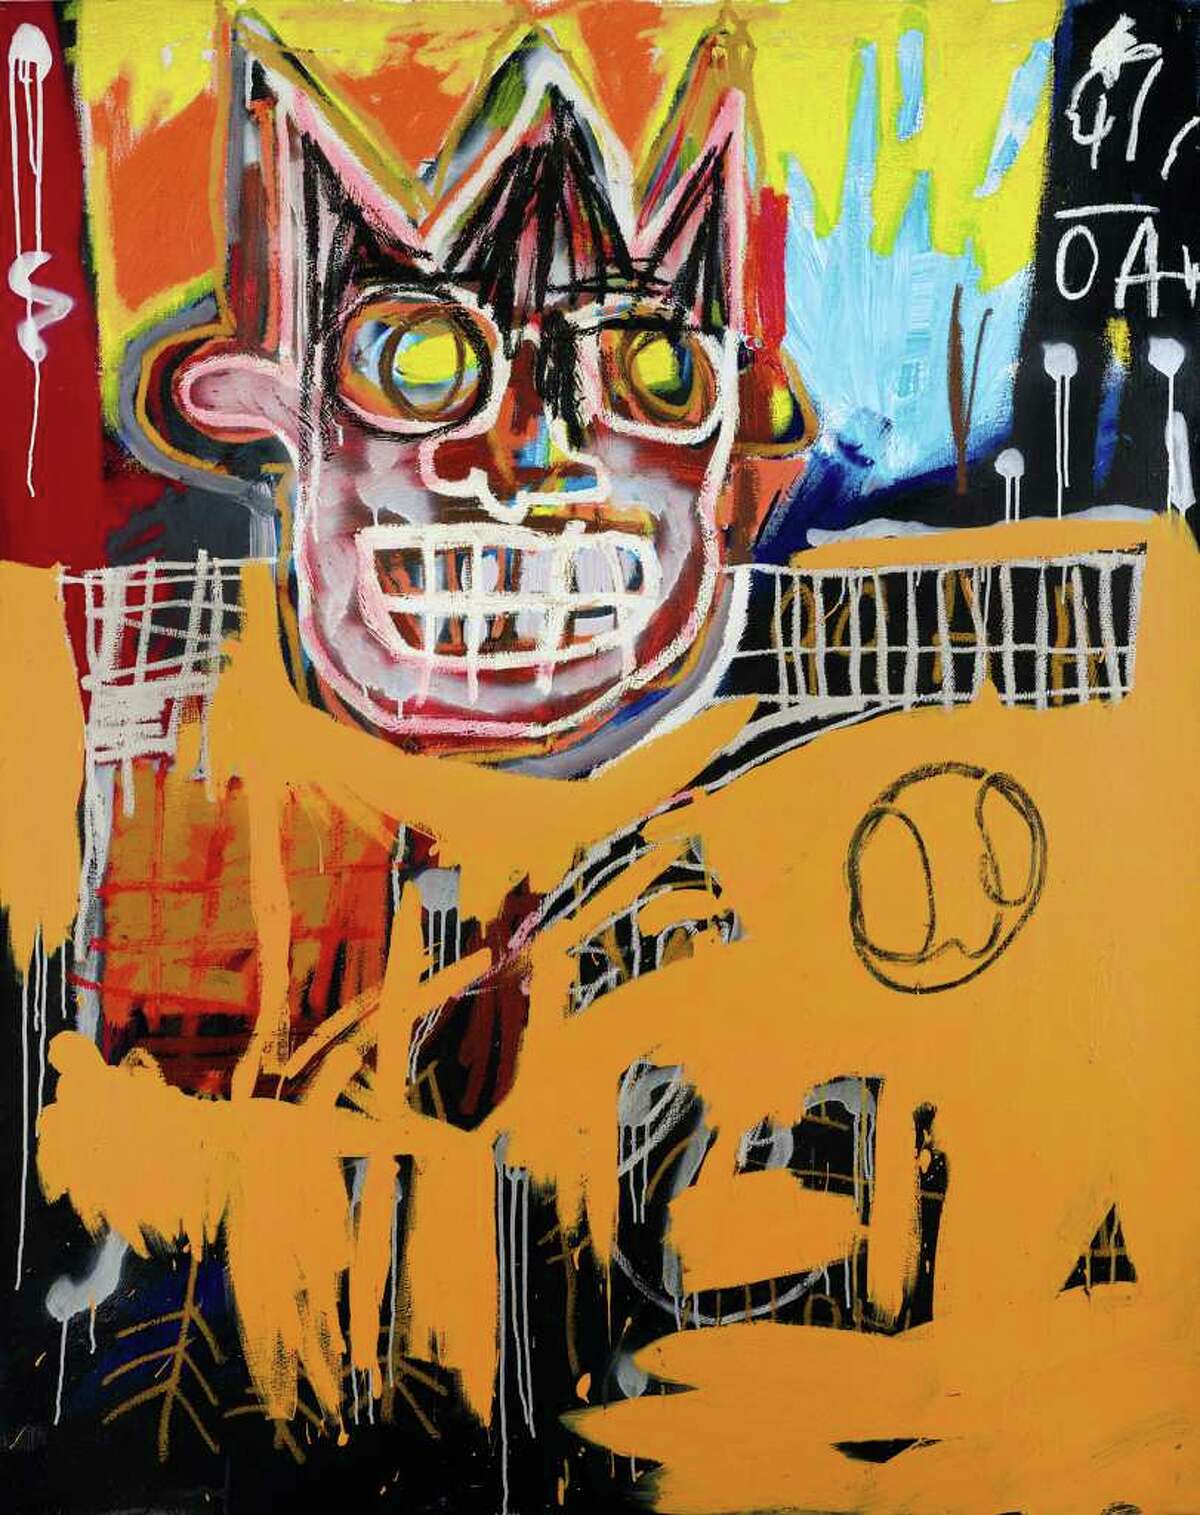 New York City Students Draw on Jean-Michel Basquiat for Inspiration - WSJ